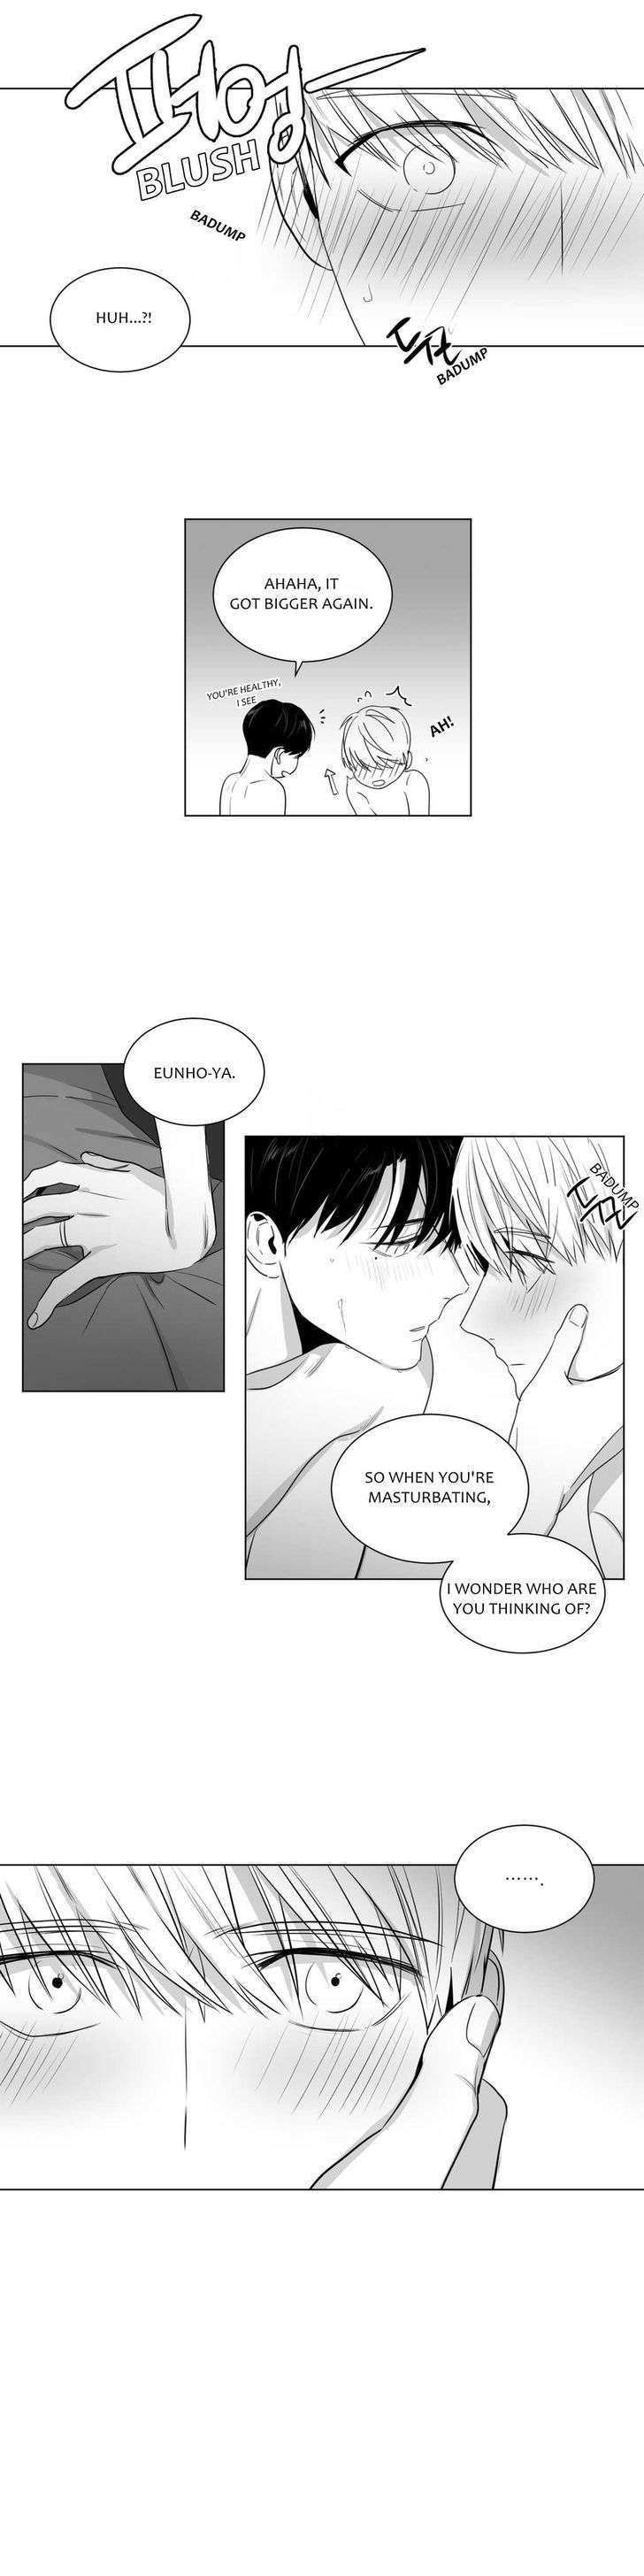 Lover Boy (Lezhin) Chapter 015 page 11